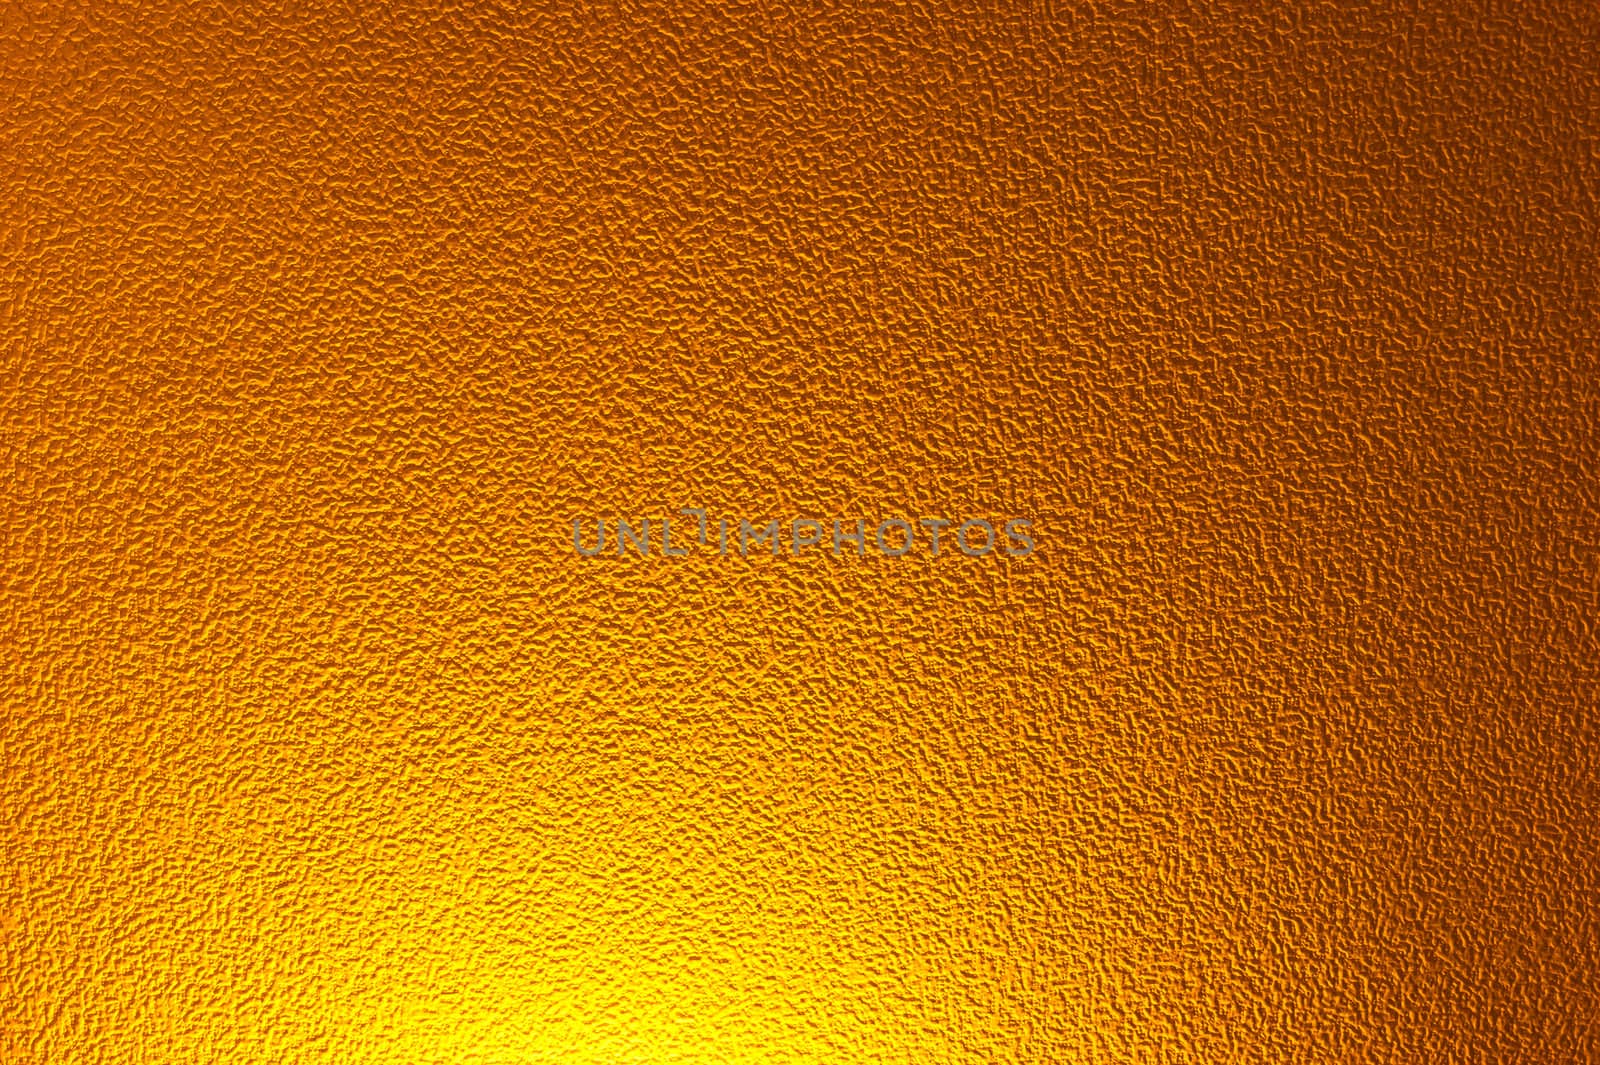 orenge light and surface on the wall